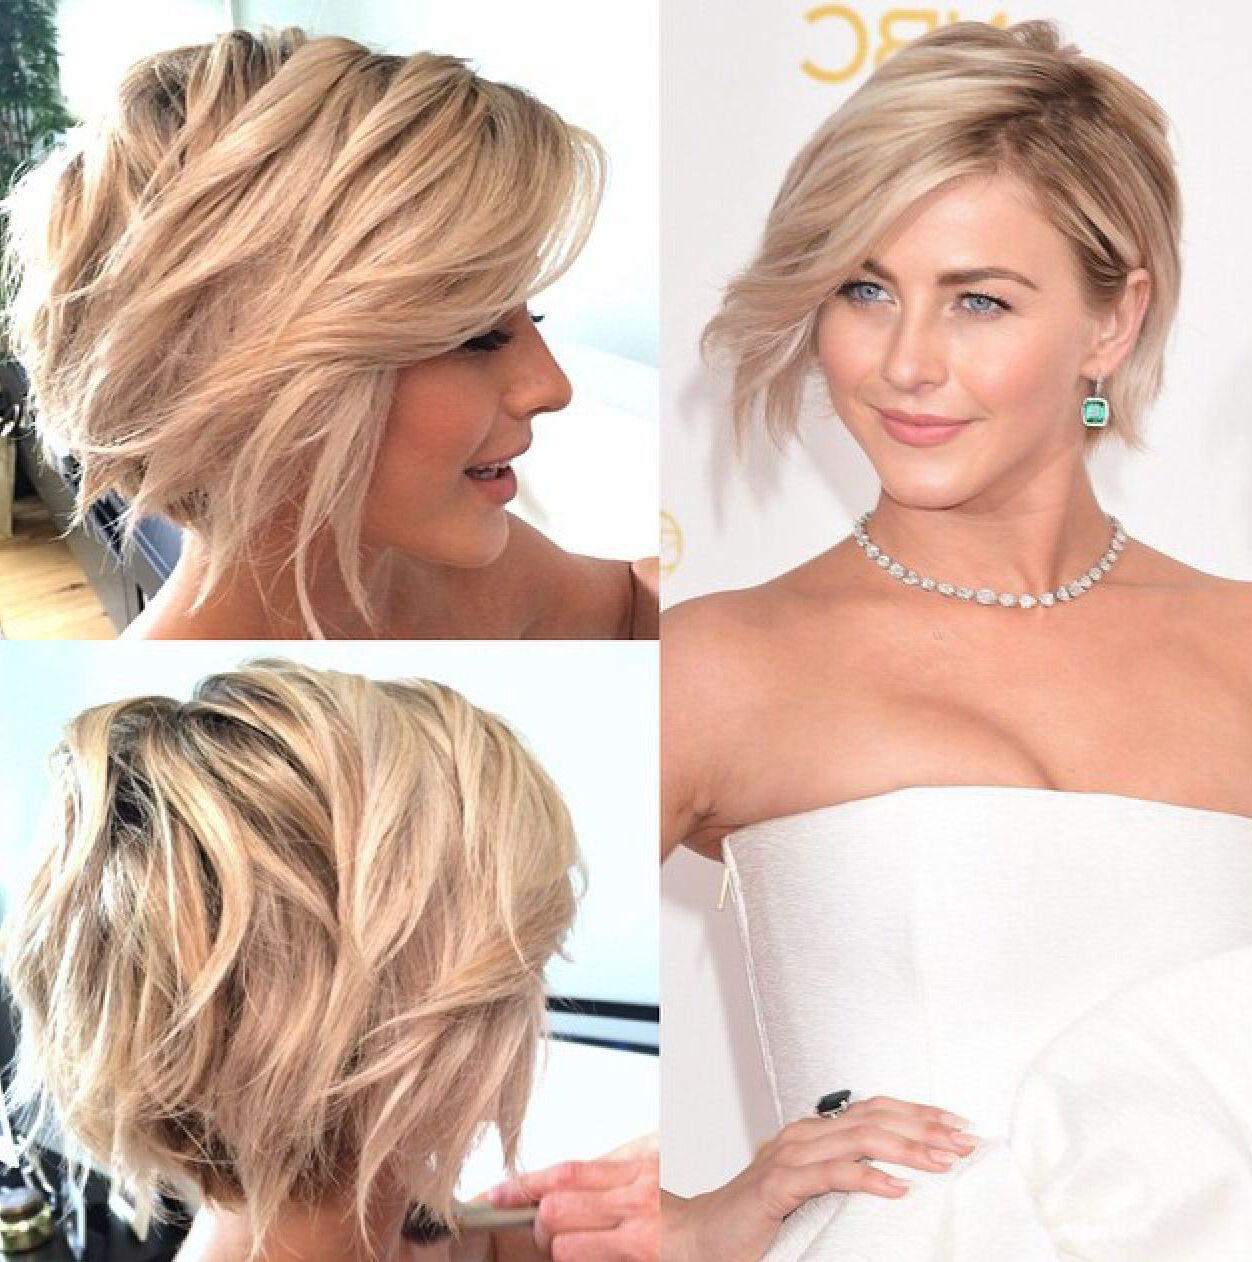 28 Best New Short Layered Bob Hairstyles | Lovely Hairstyles With Regard To Julianne Hough Short Haircuts (Photo 22 of 25)